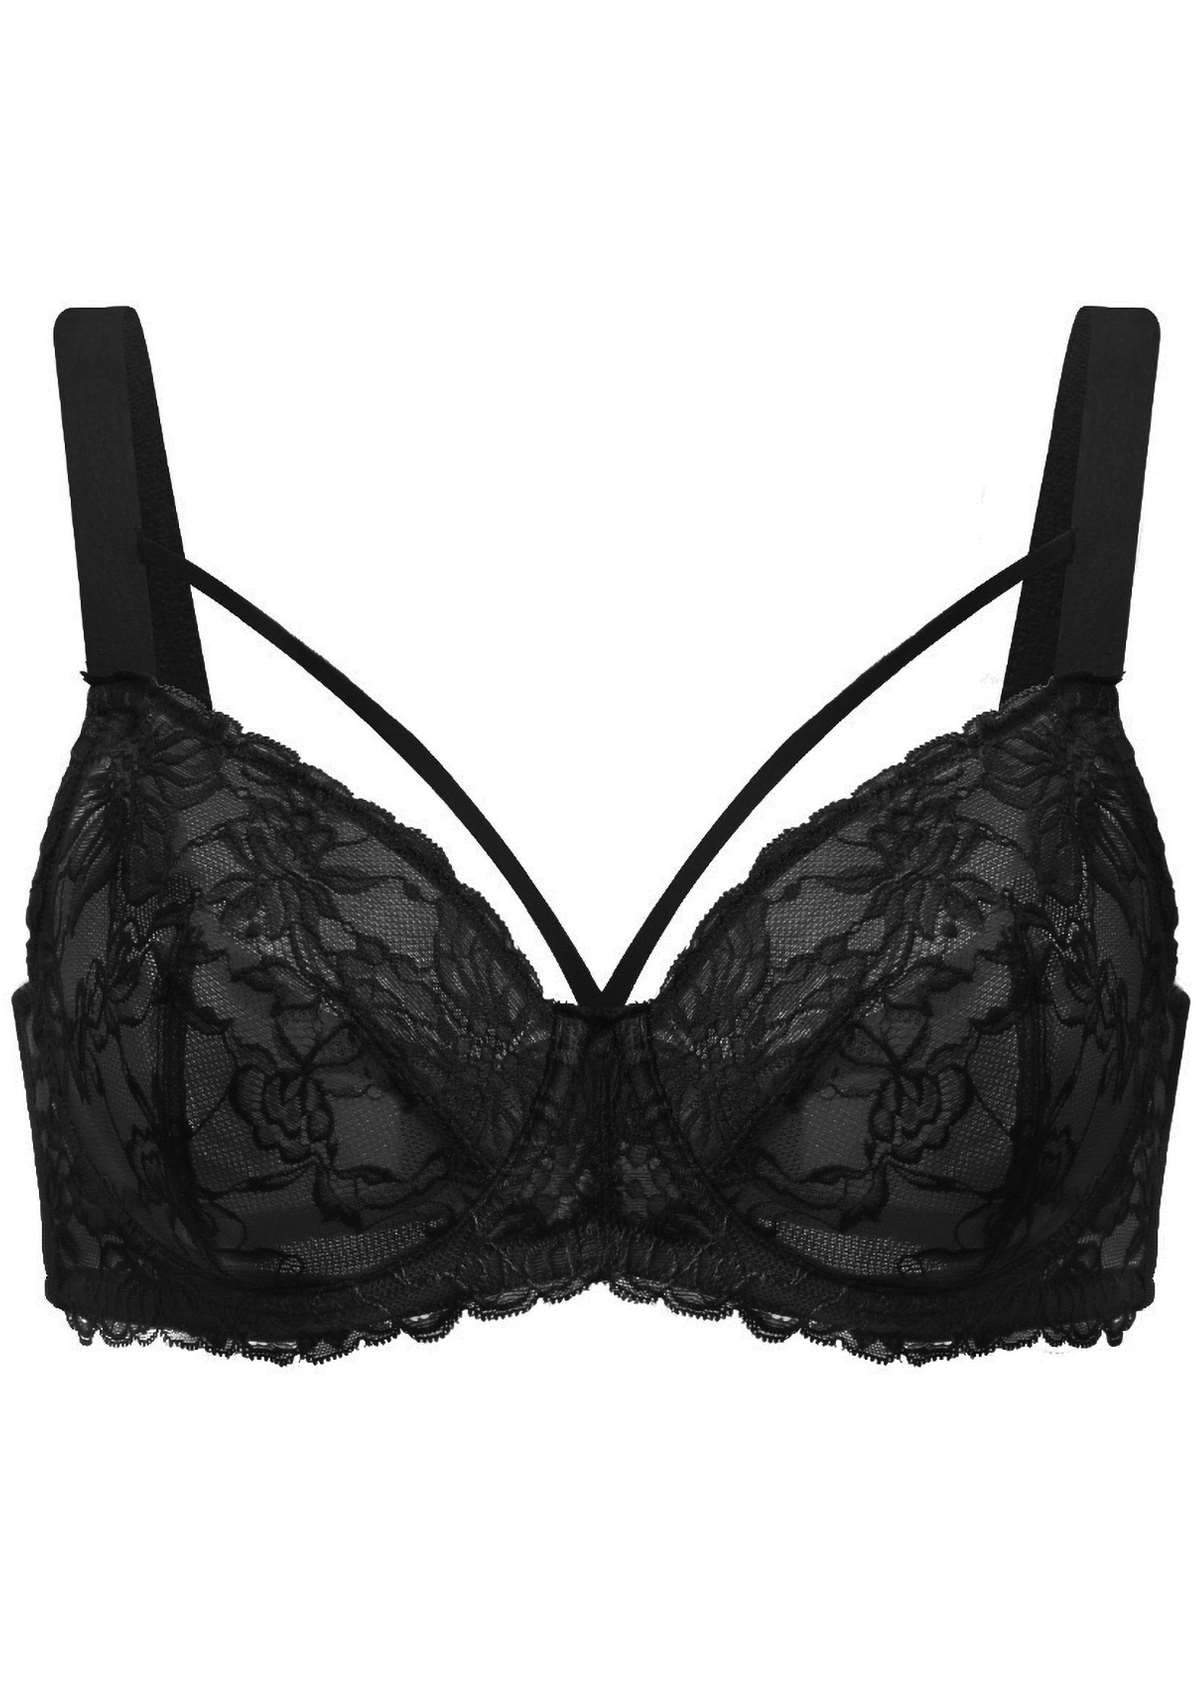 HSIA Pretty In Petals Bra - Plus Size Lingerie For Comfrot And Support - Black / 42 / B